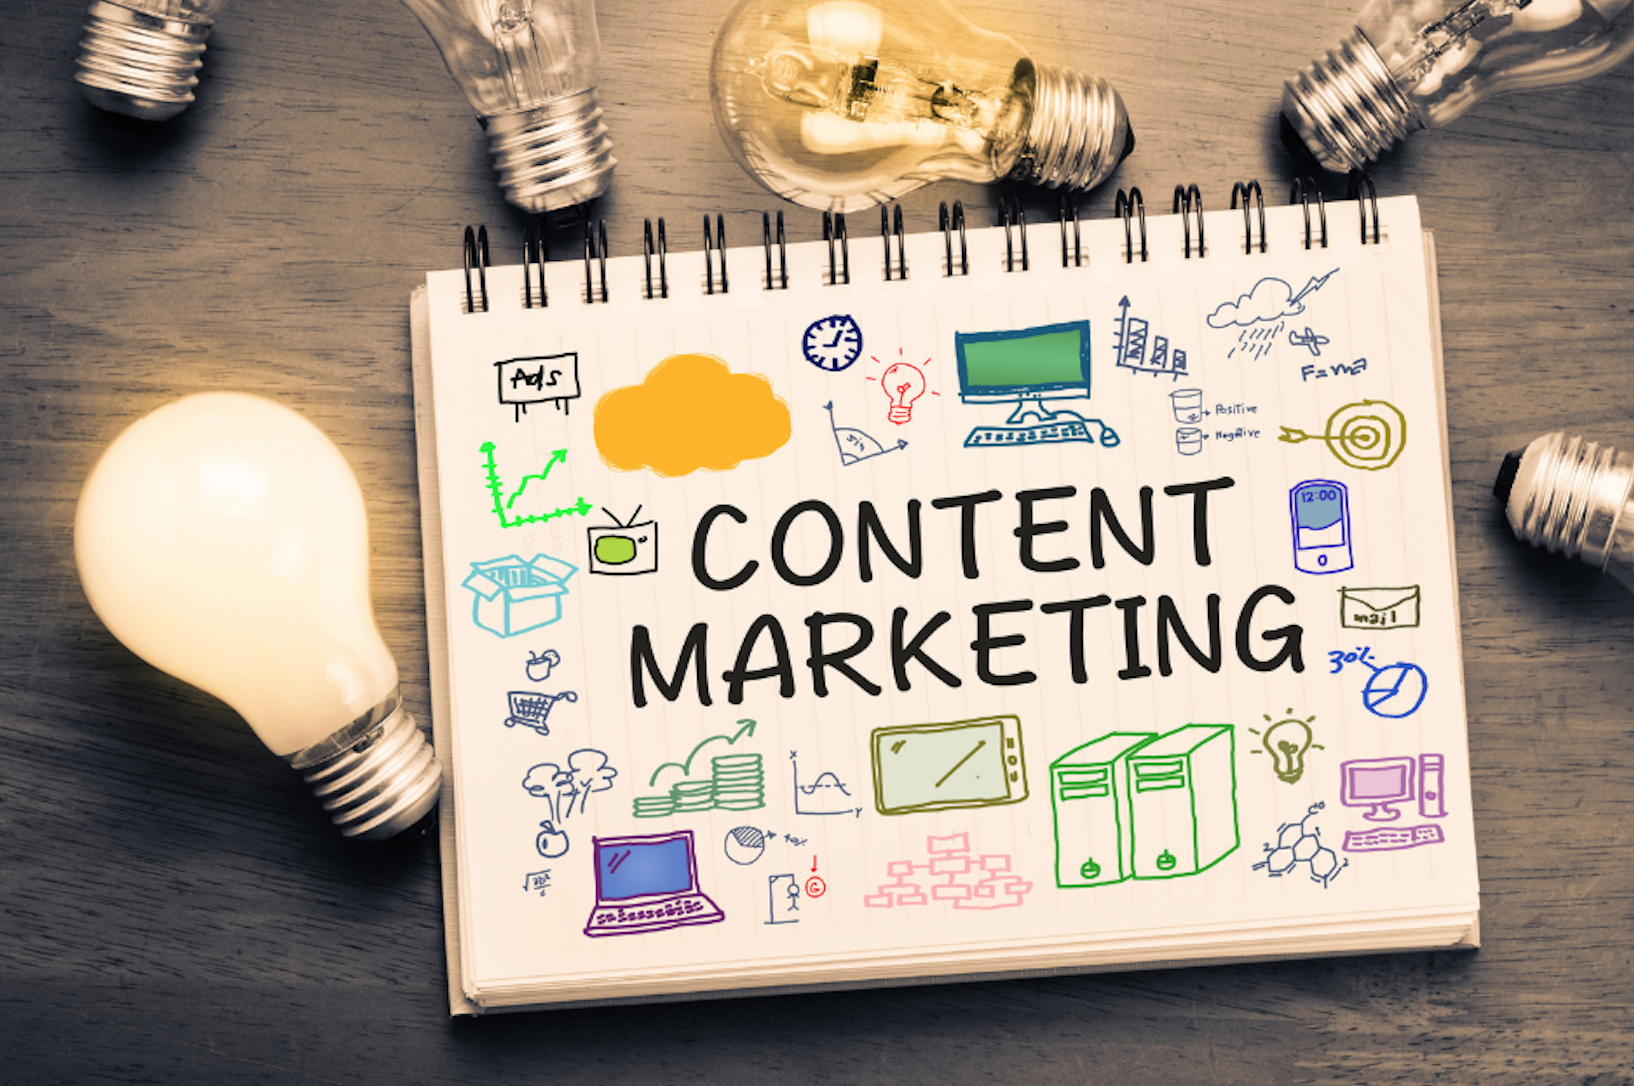 content marketing is very important and has become an essential component of any successful digital marketing strategy